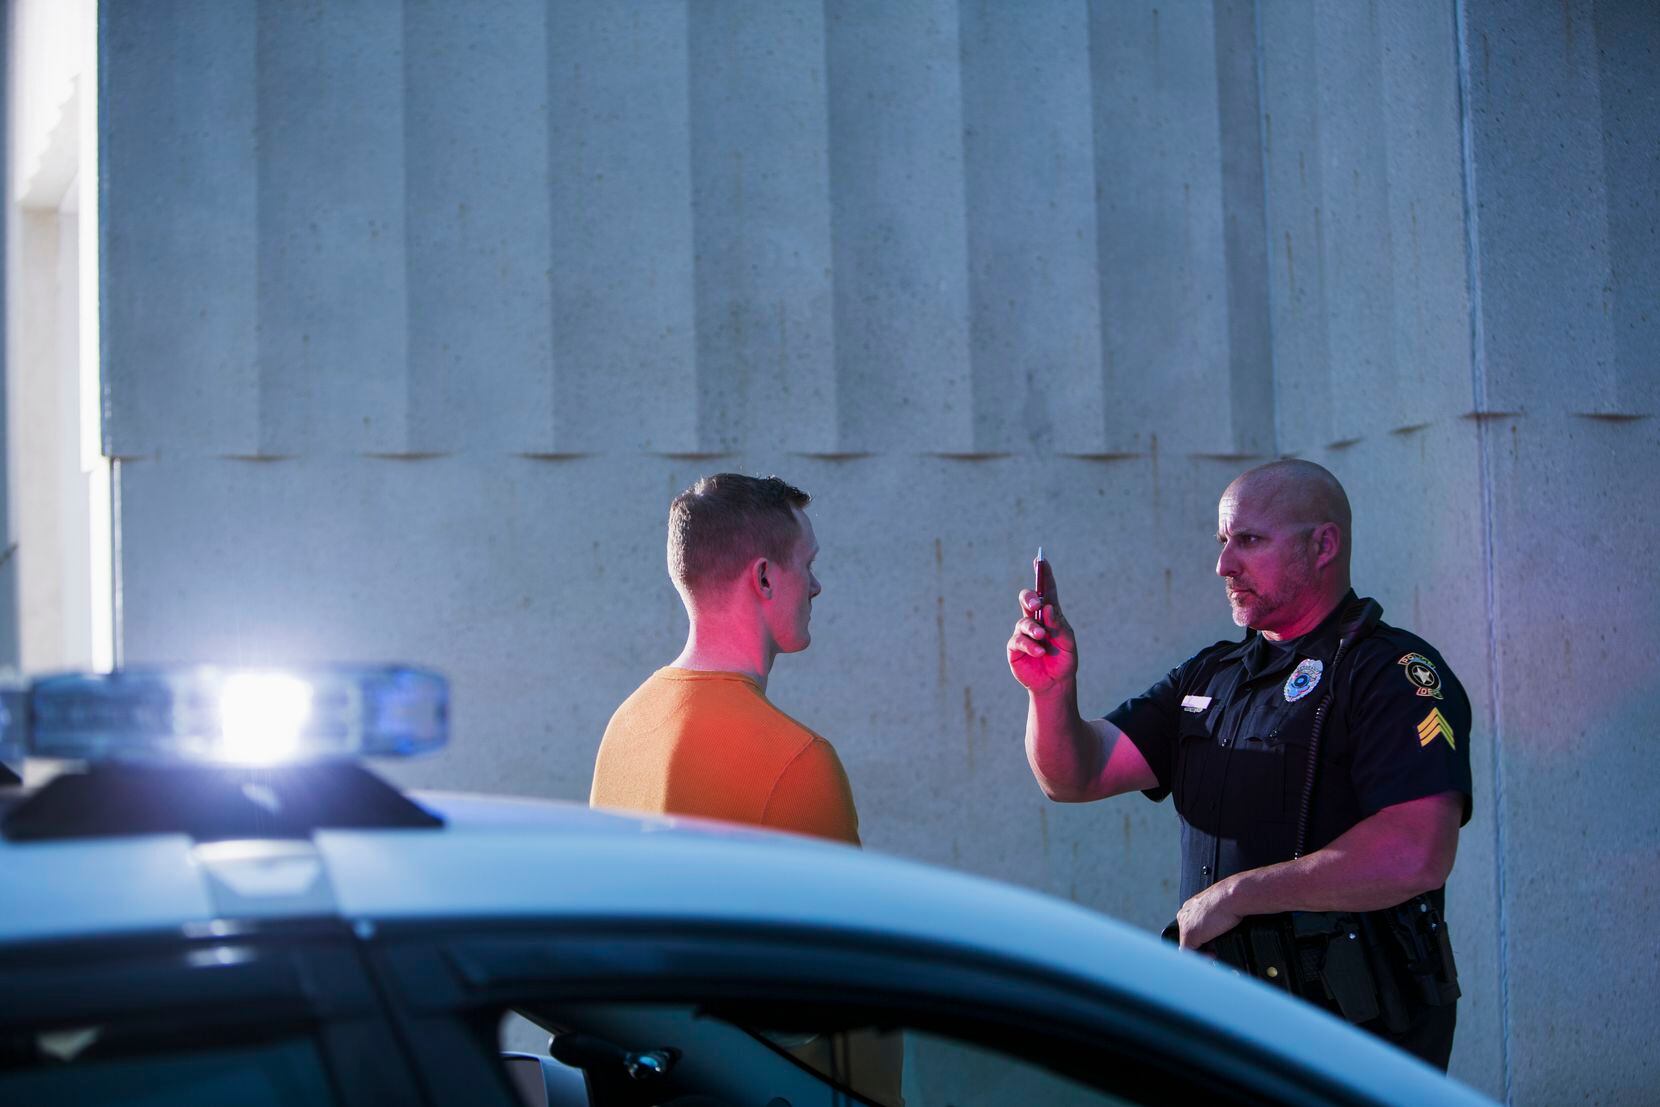 Police officer giving sobriety test to young man to see if he is driving under the influence...